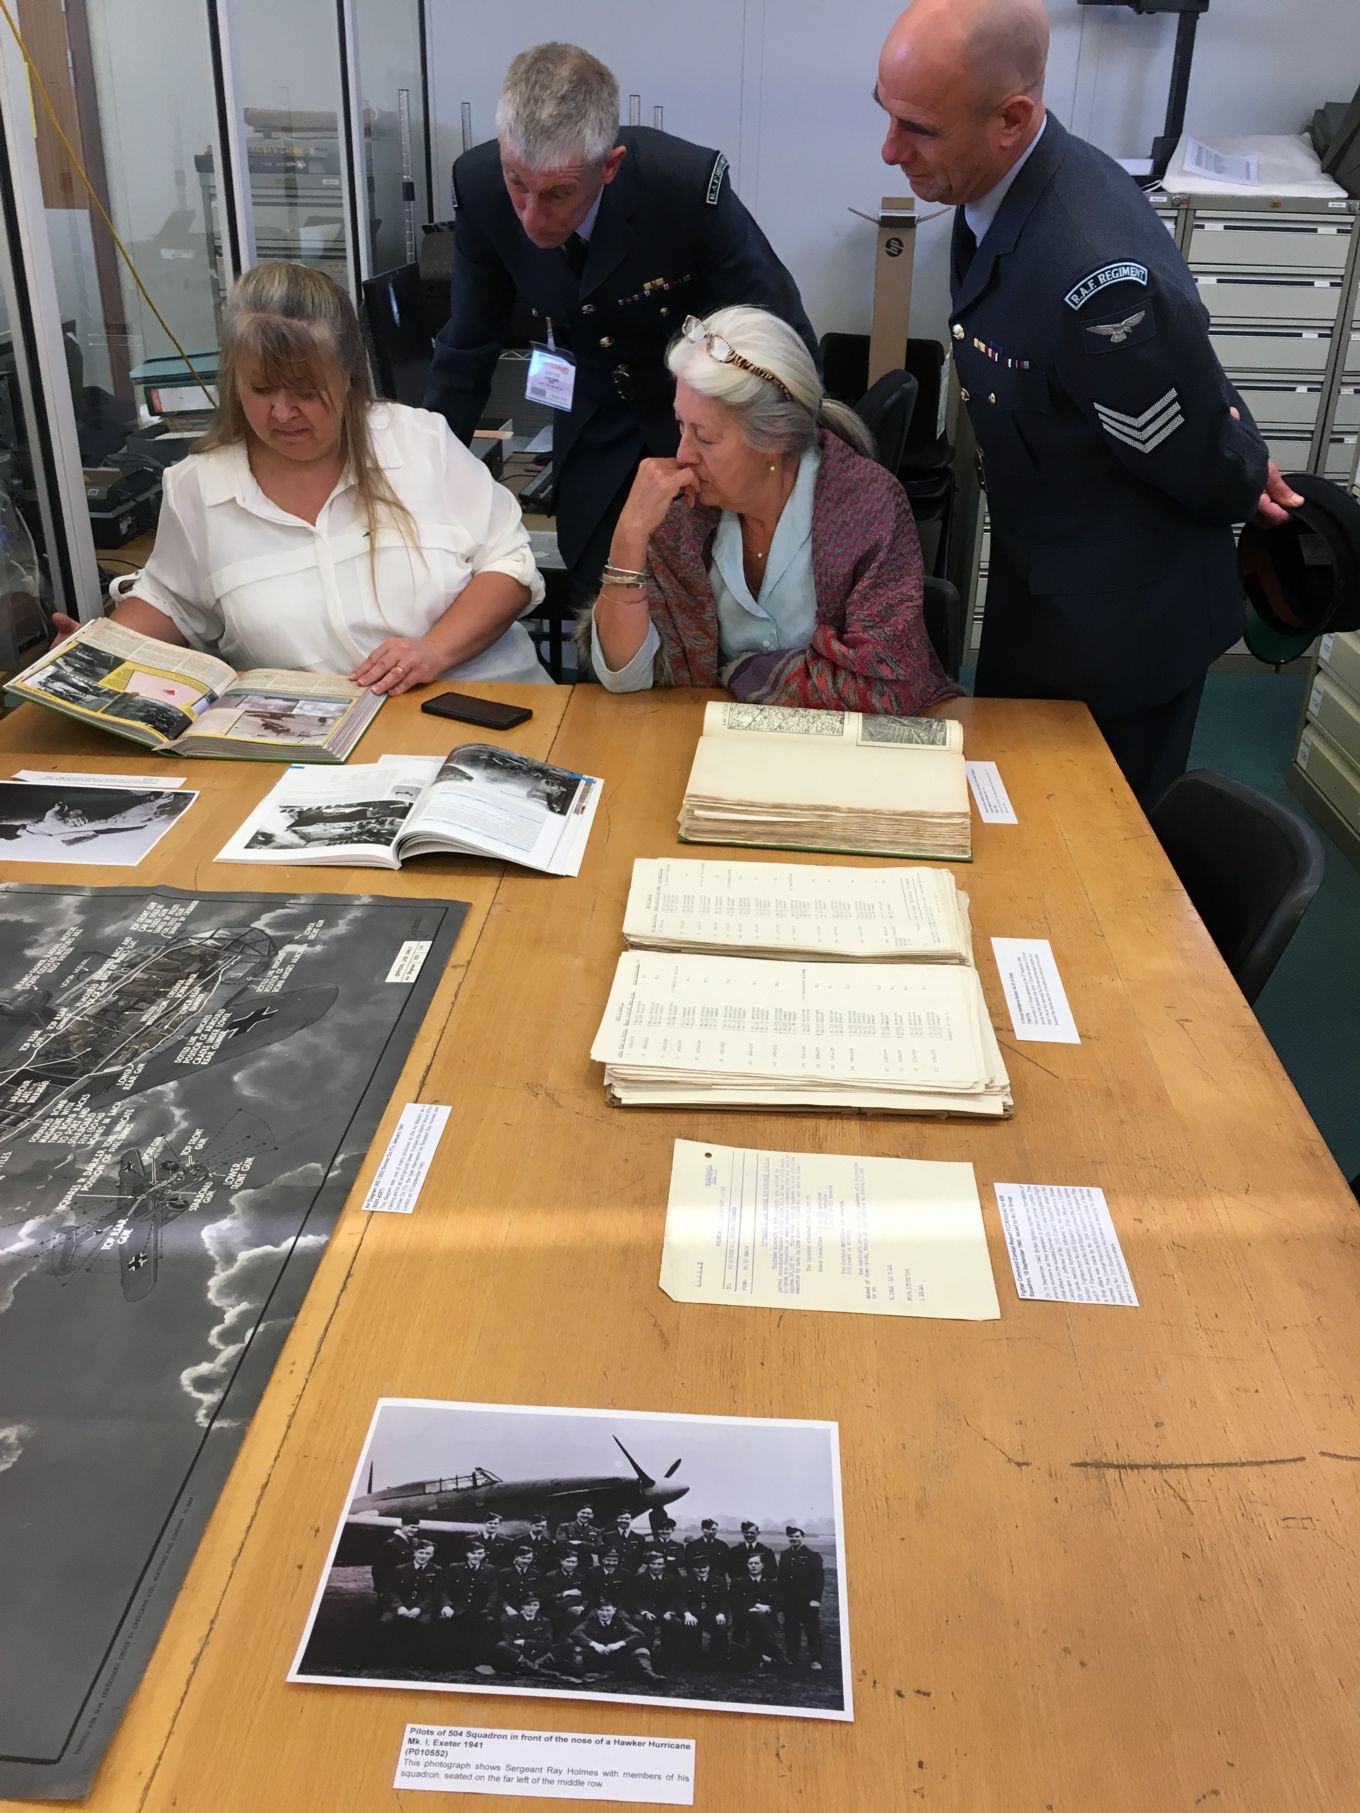 From left to right: Kate Whitworth, Andy Ham, Anne Holmes and Nick Woolmer looking over records at the RAF Museum in Hendon.